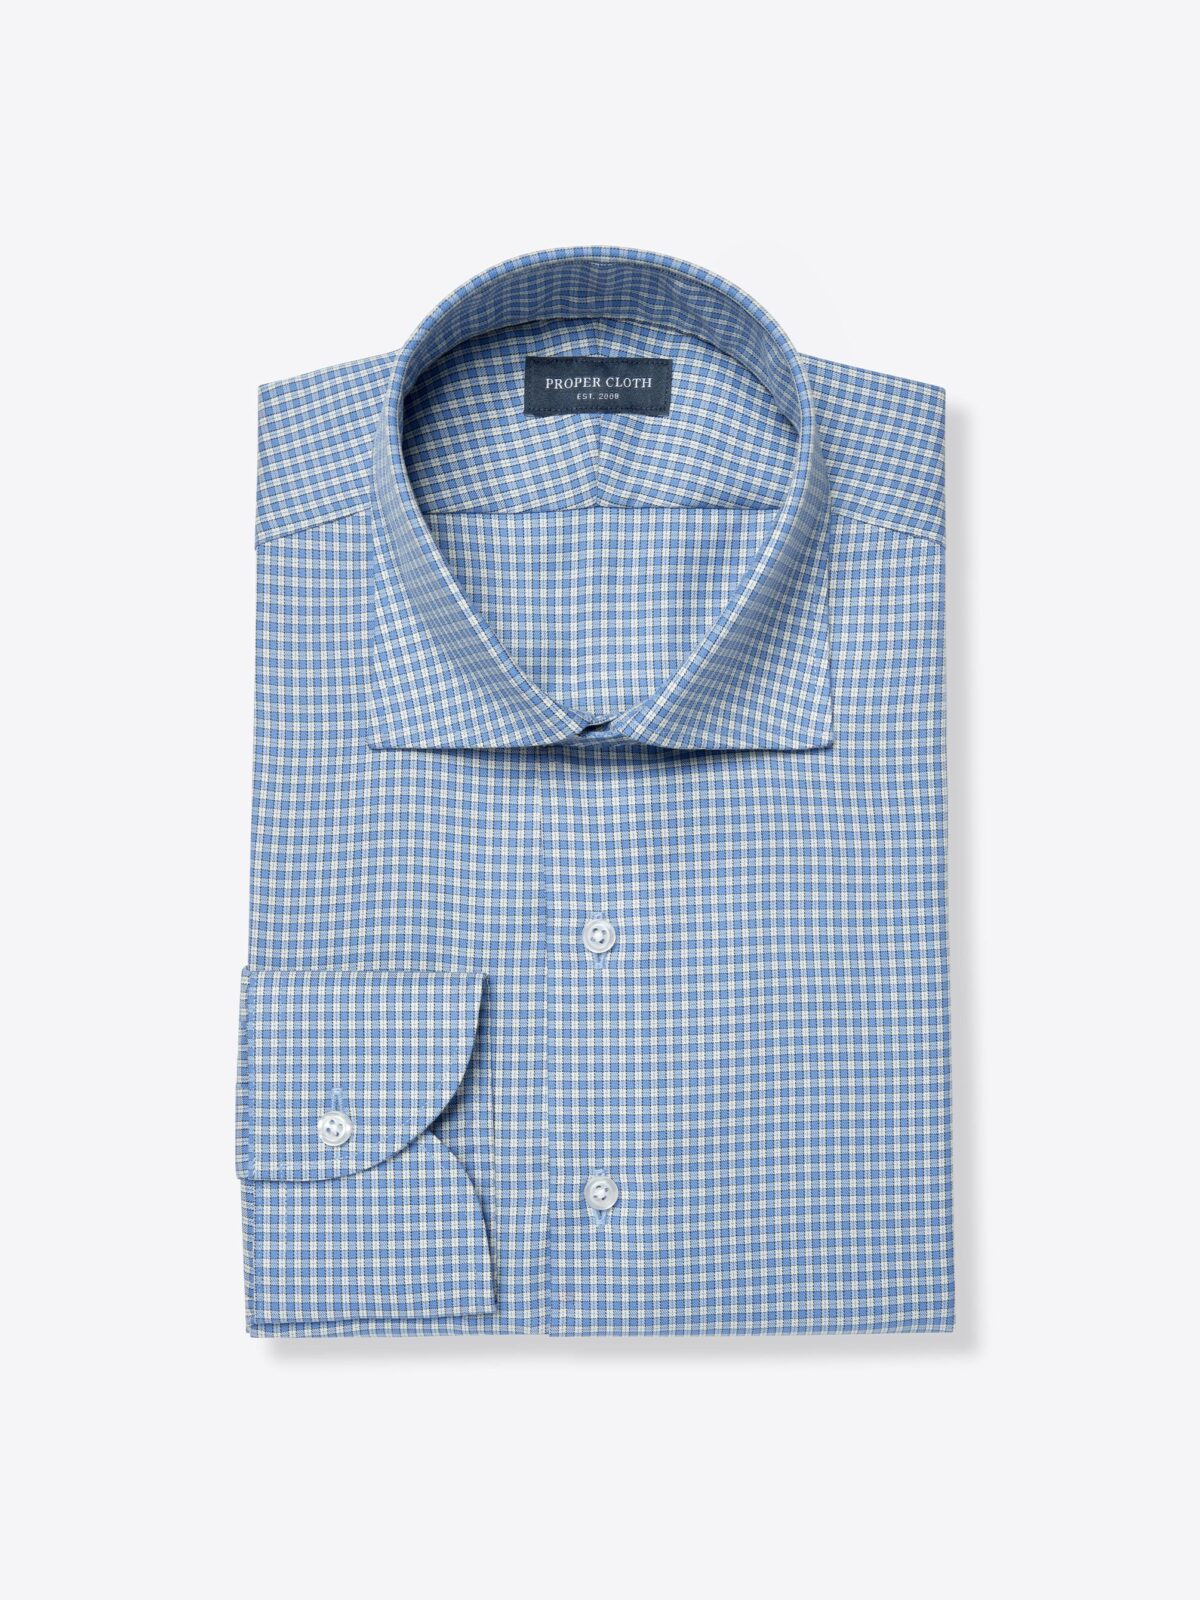 Mayfair Wrinkle-Resistant Blue Small Check Twill Shirt by Proper Cloth